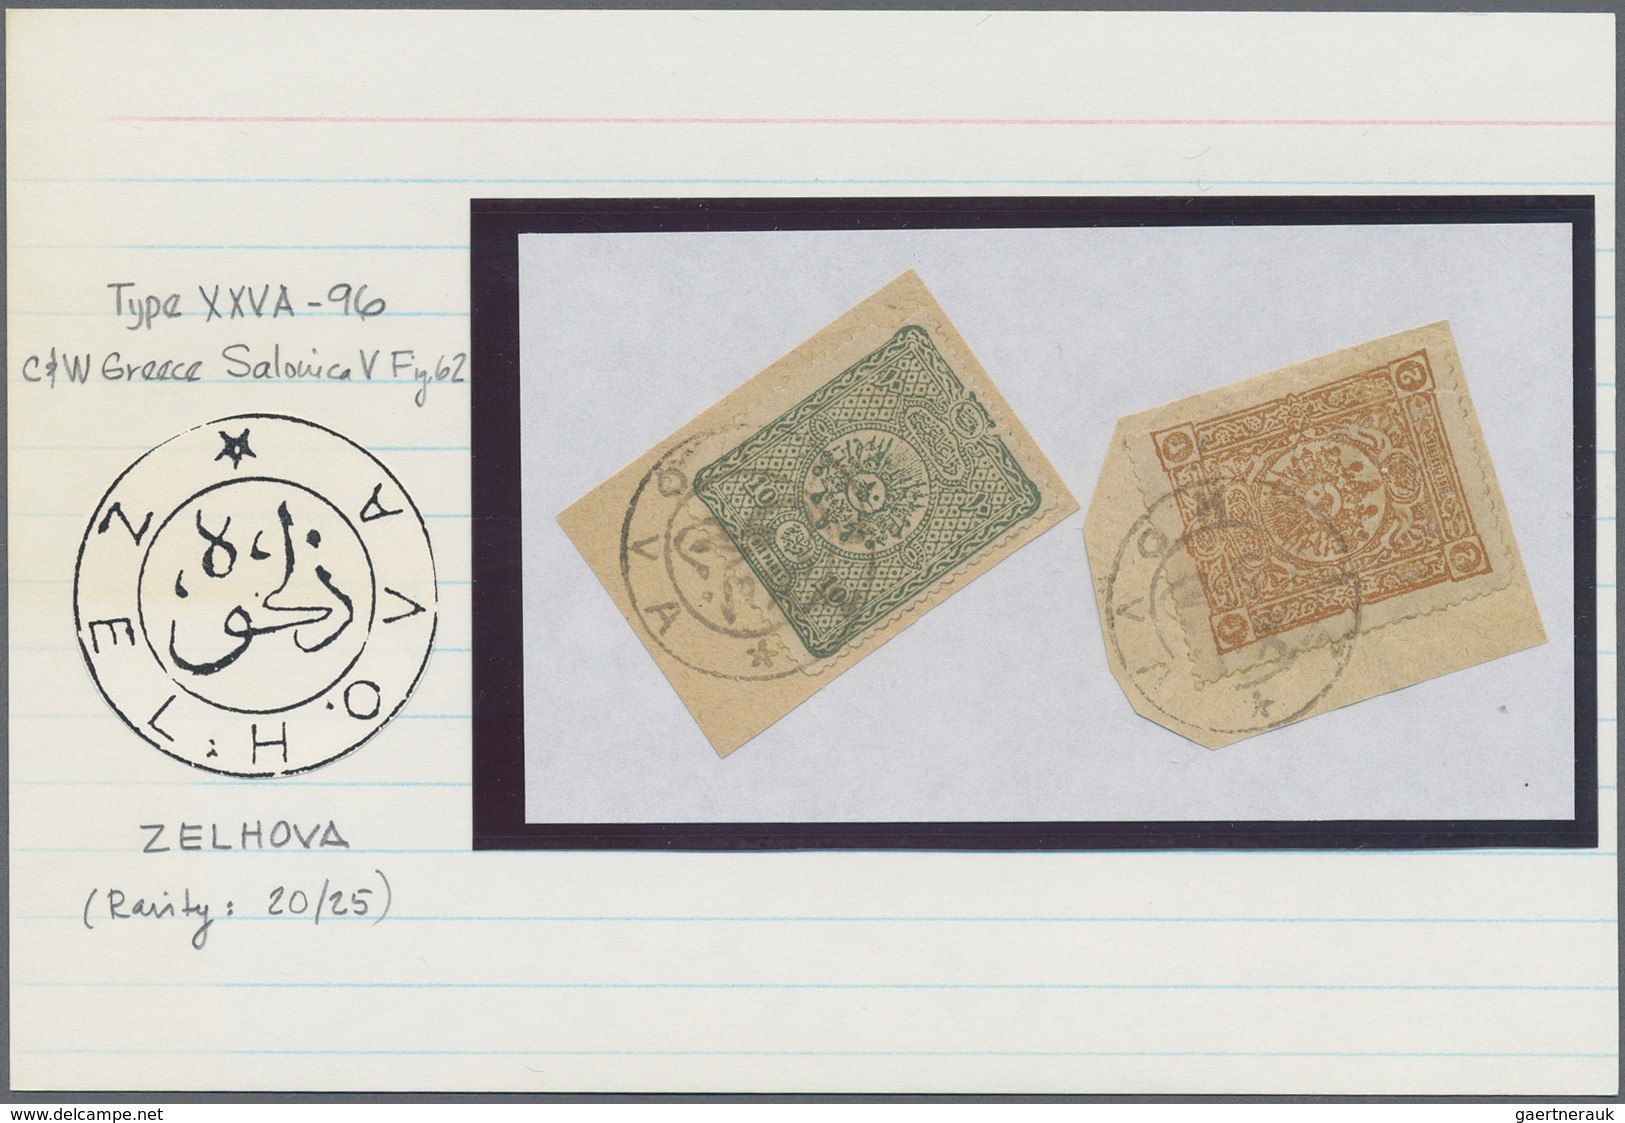 Brfst/O Griechenland: 1841-1918, Cancellations of Ottoman Empire used in Greece on over 100 stamps and on pi